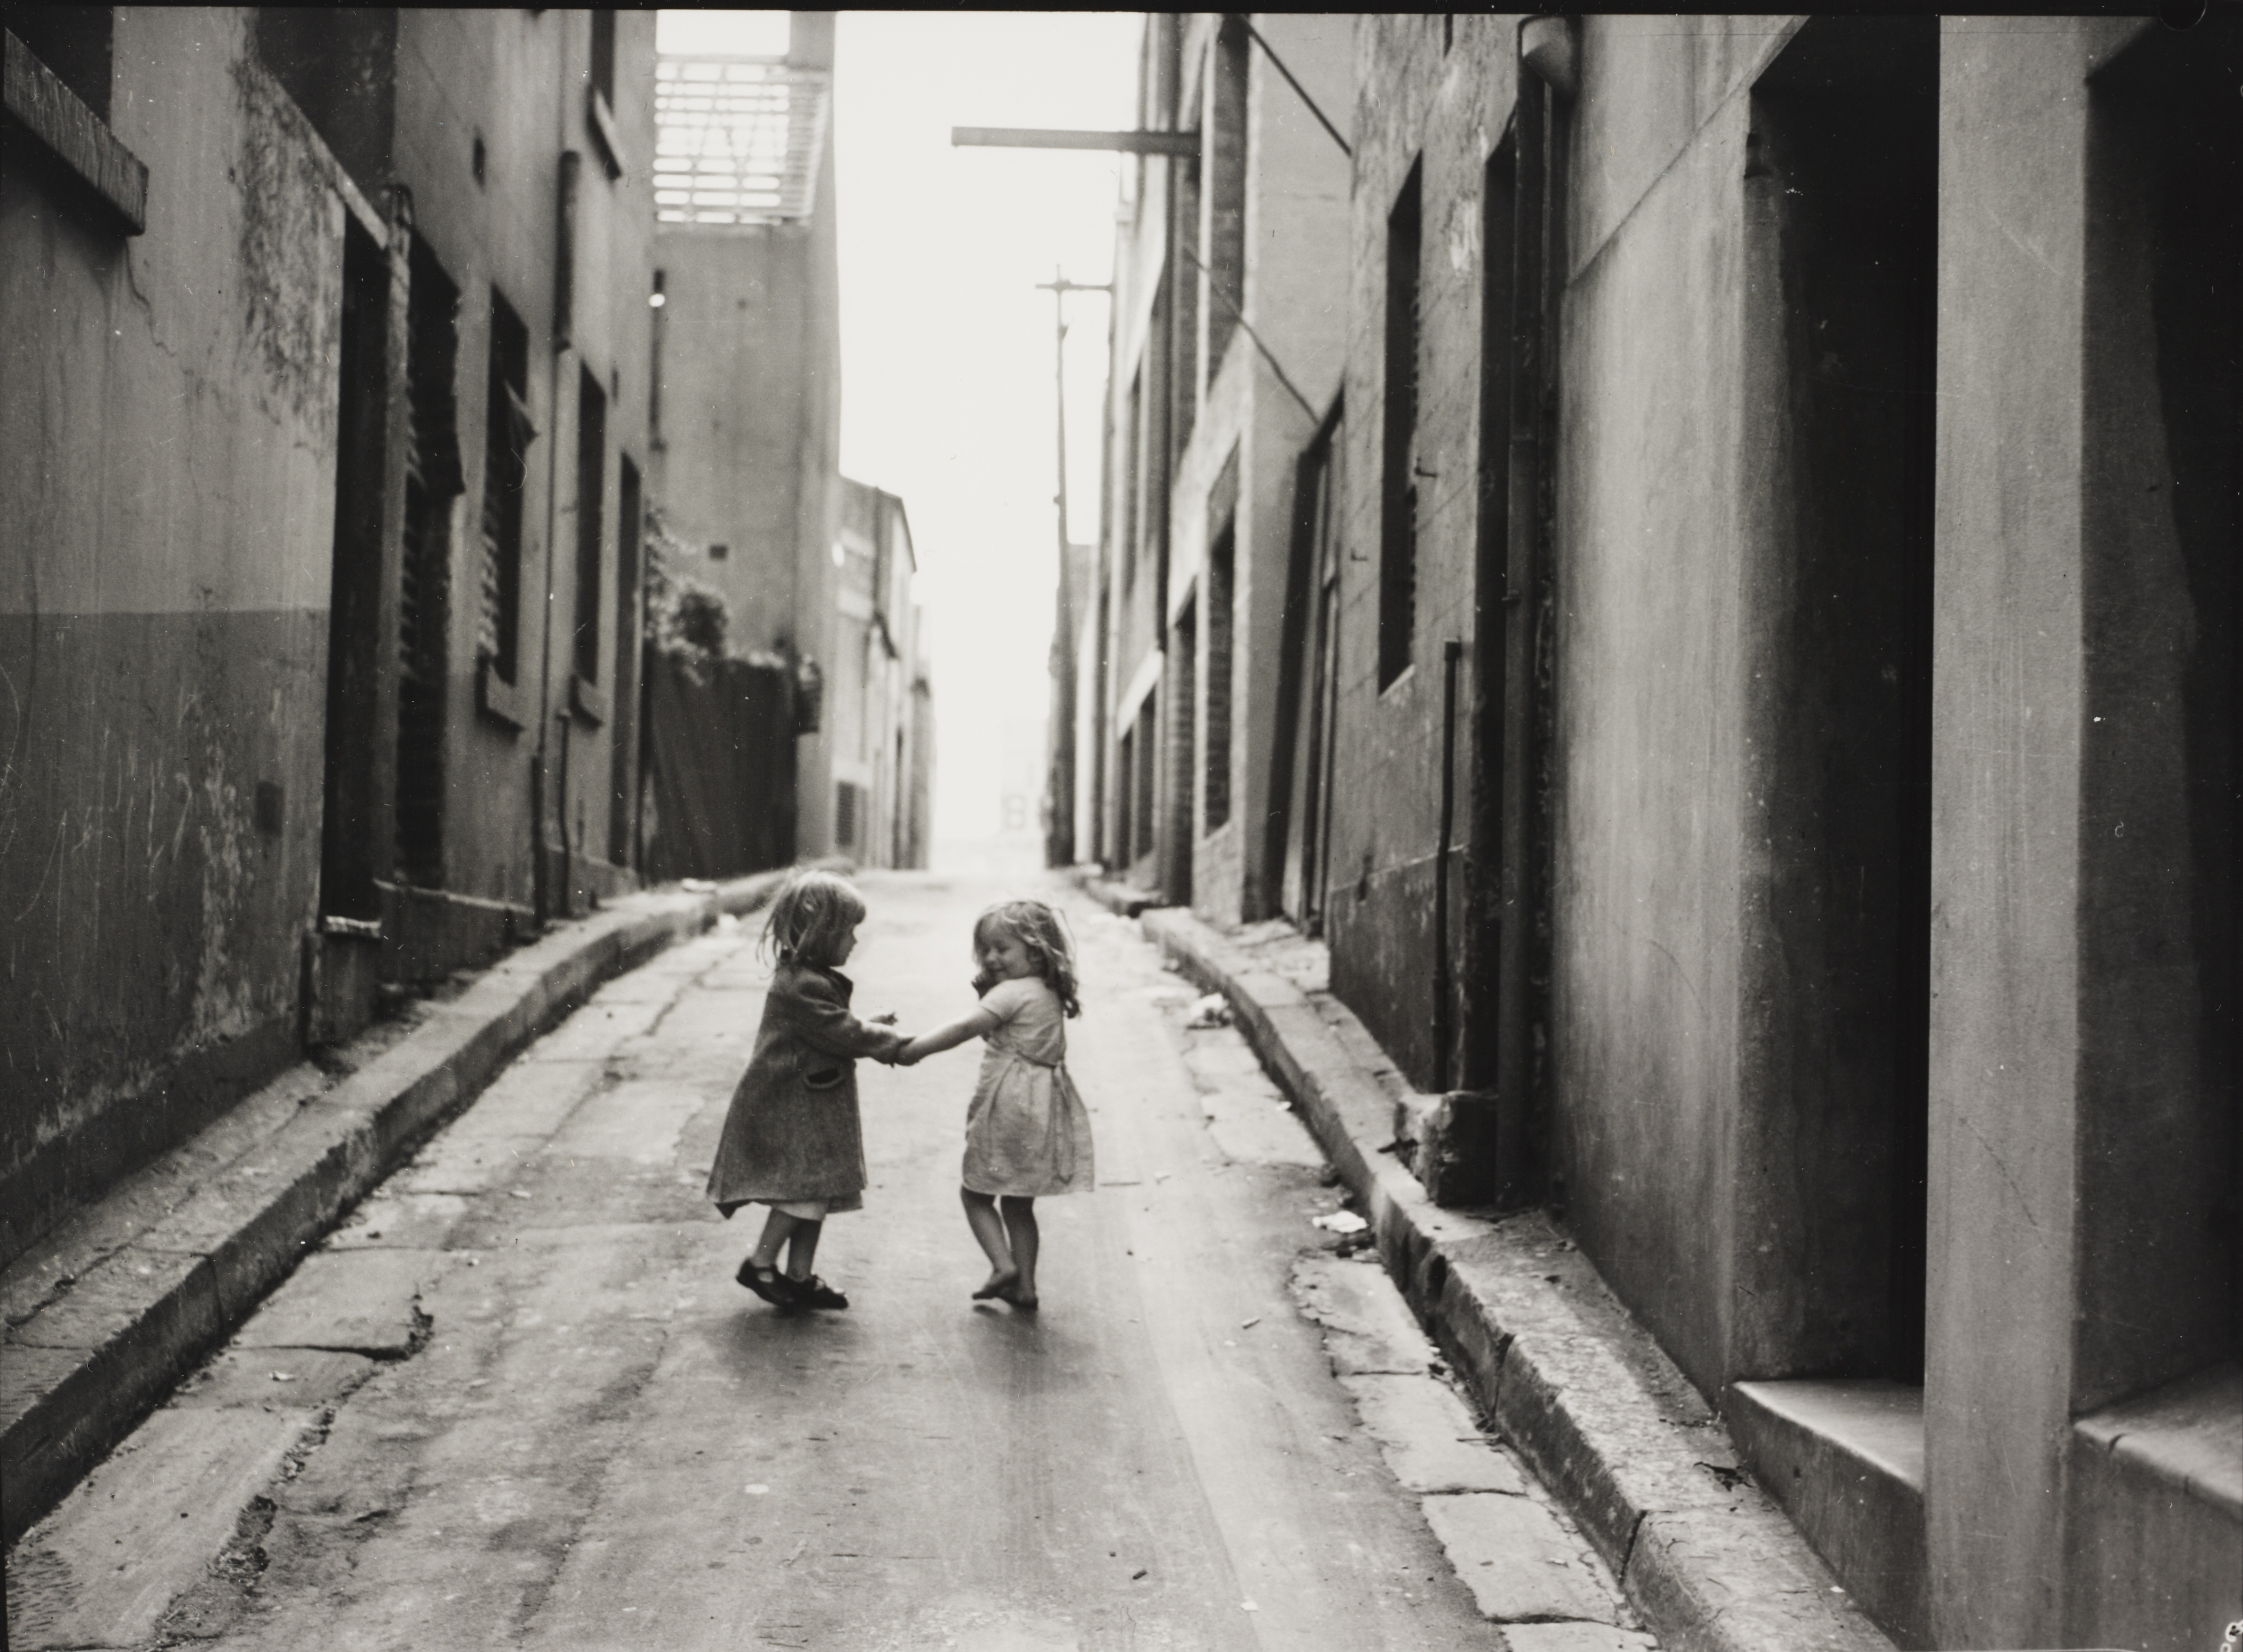 Two children, Little Riley Street, Surry Hills, Sydney, 1949, by Ted Hood